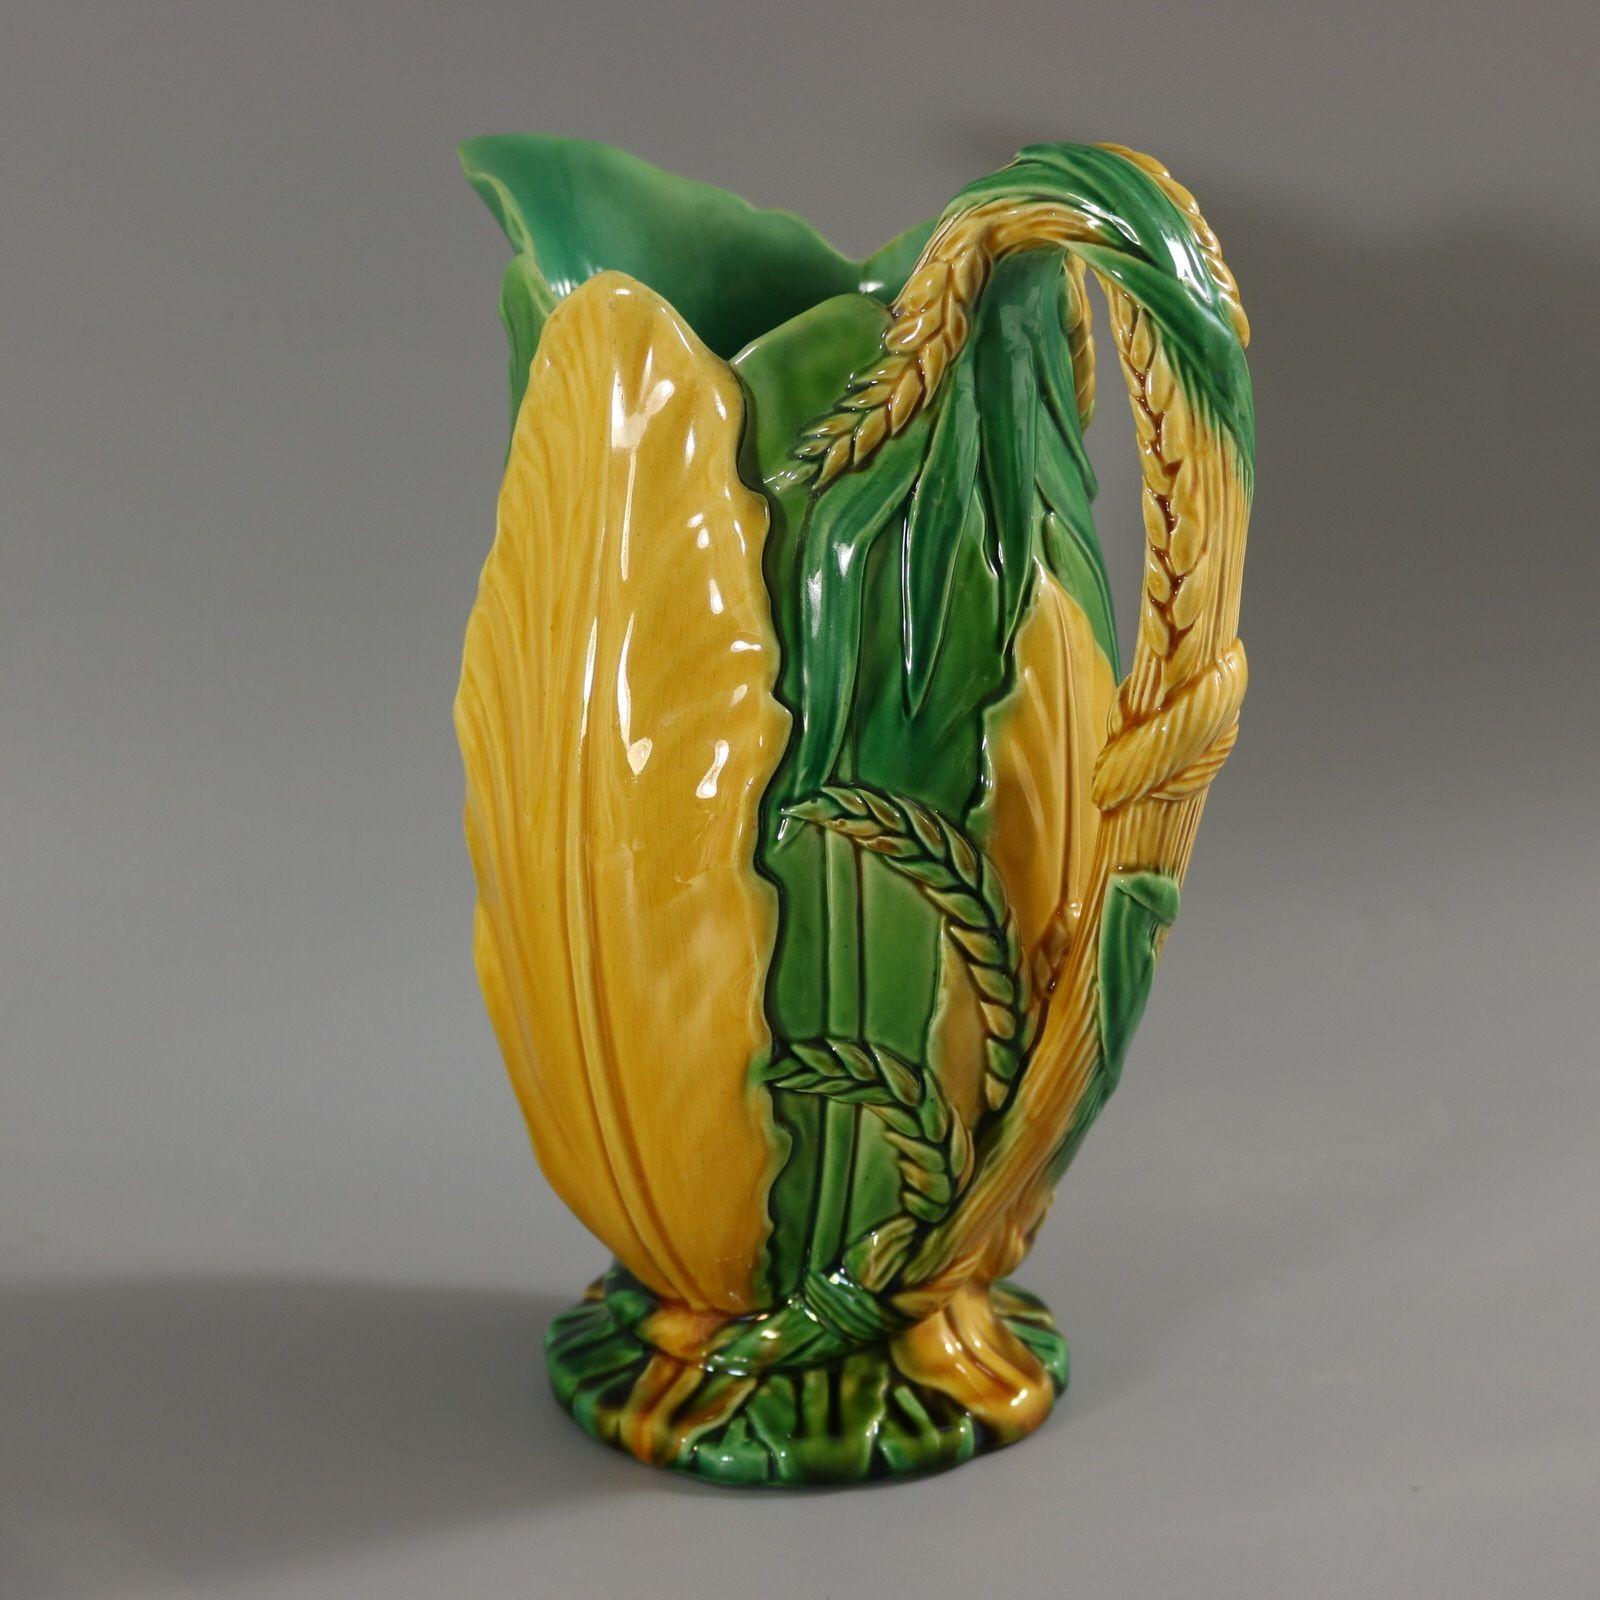 Minton Majolica jug/pitcher which features corn forming the handle. The sides in the form of banana leaves. Colouration: green, yellow, are predominant. Marks include a factory specific date cipher for the year 1856.